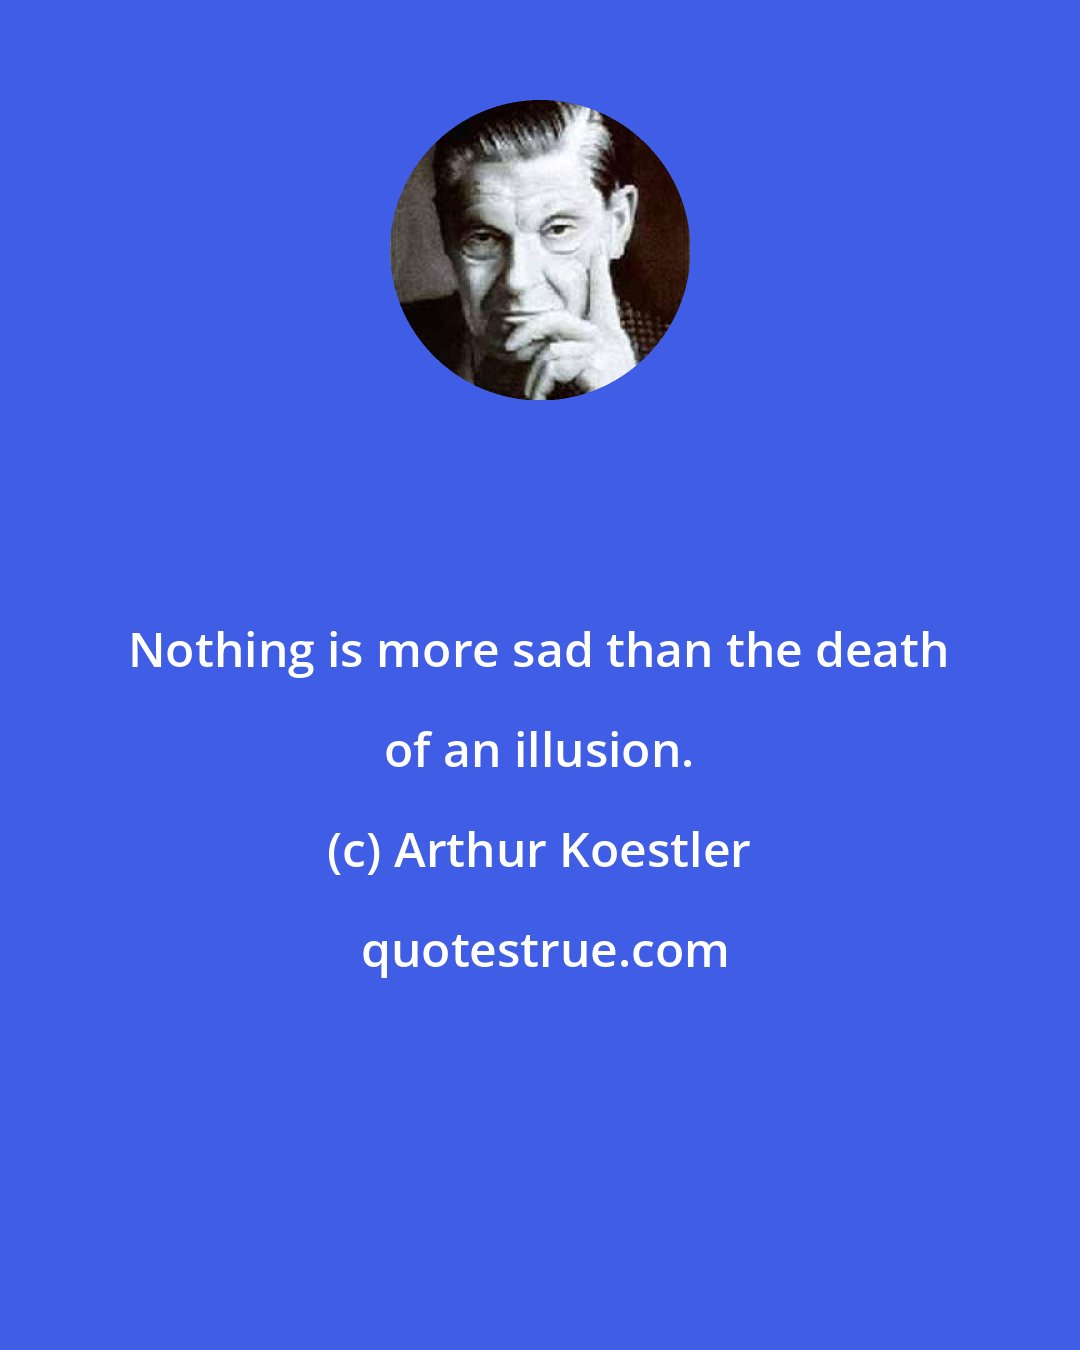 Arthur Koestler: Nothing is more sad than the death of an illusion.